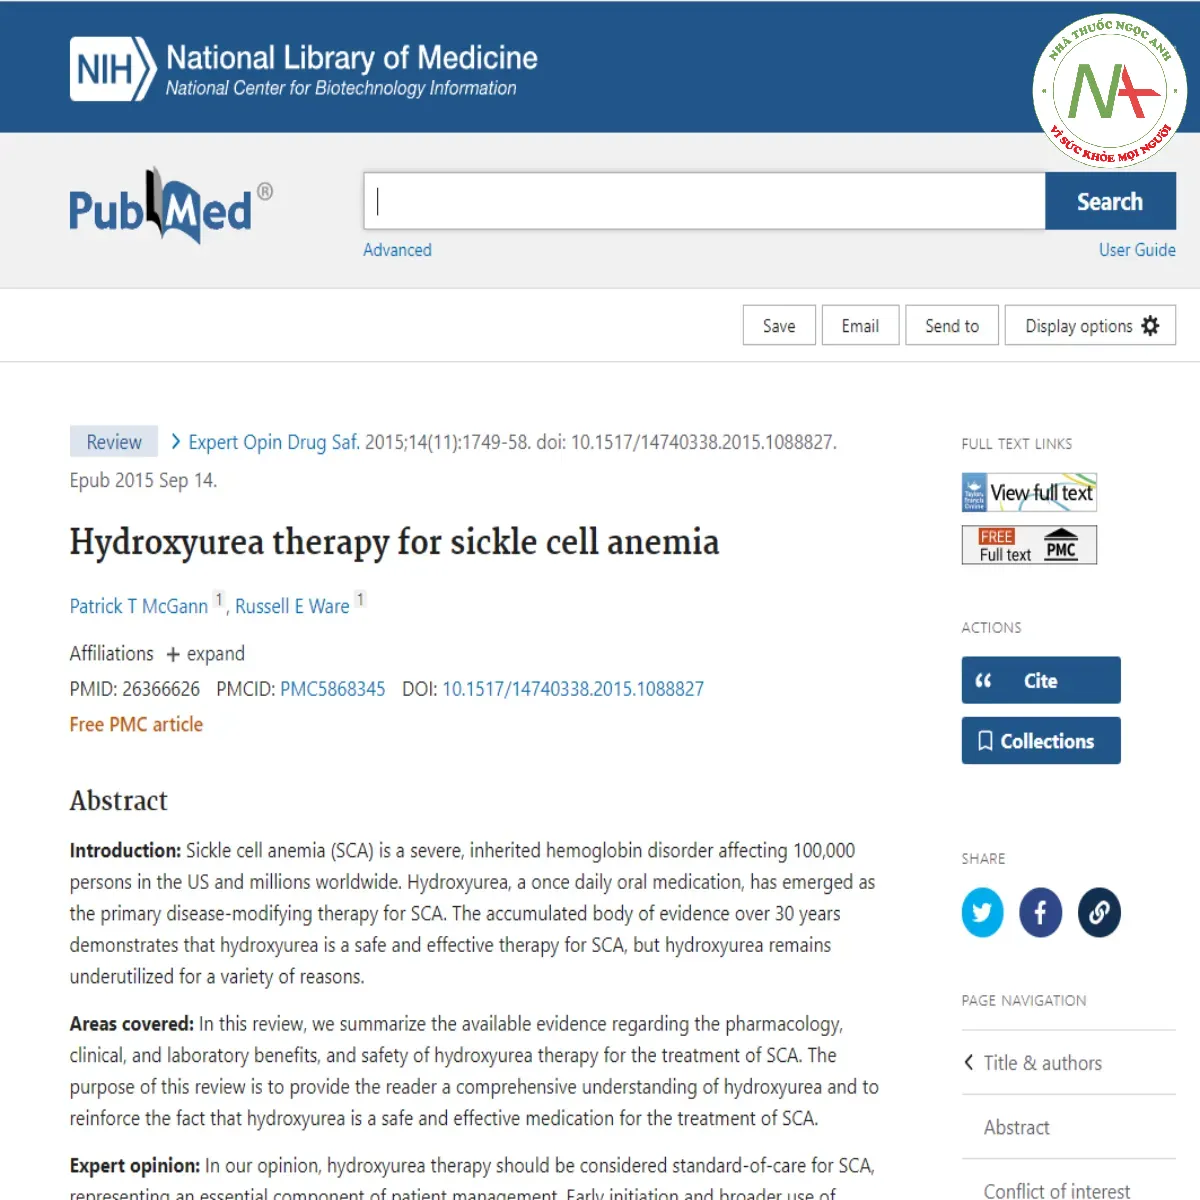 Hydroxyurea therapy for sickle cell anemia